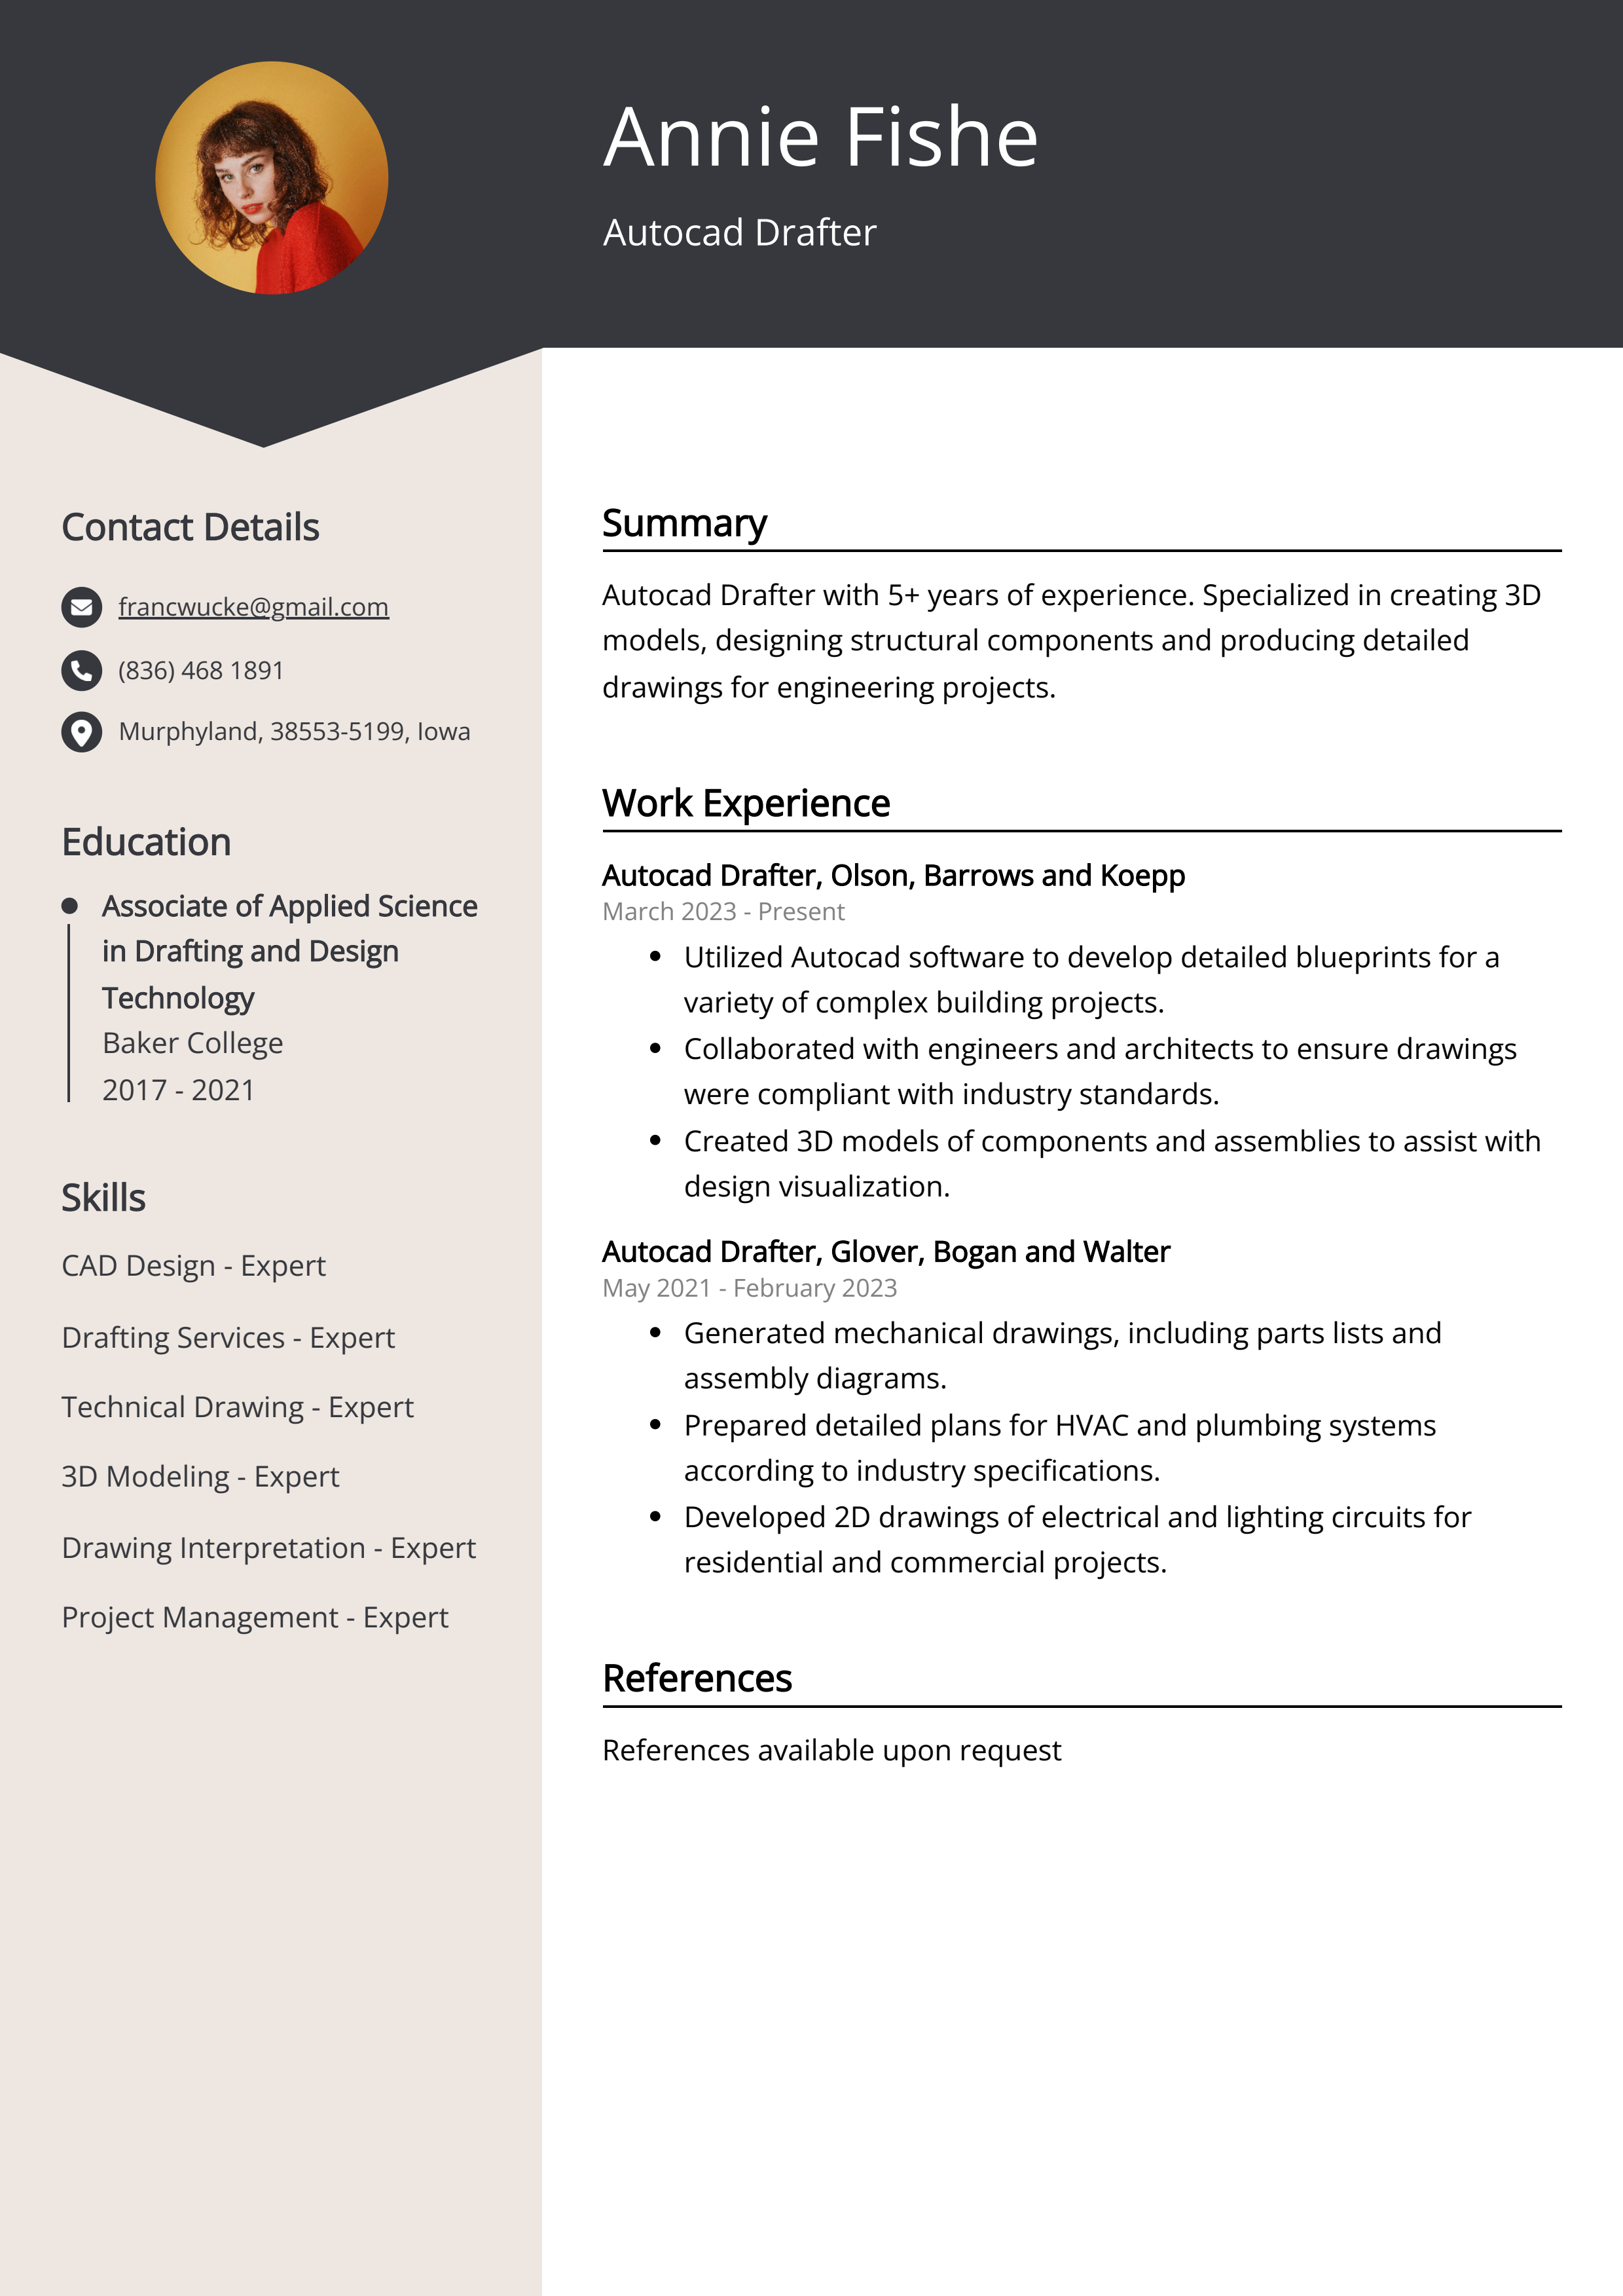 Autocad Drafter Resume Example